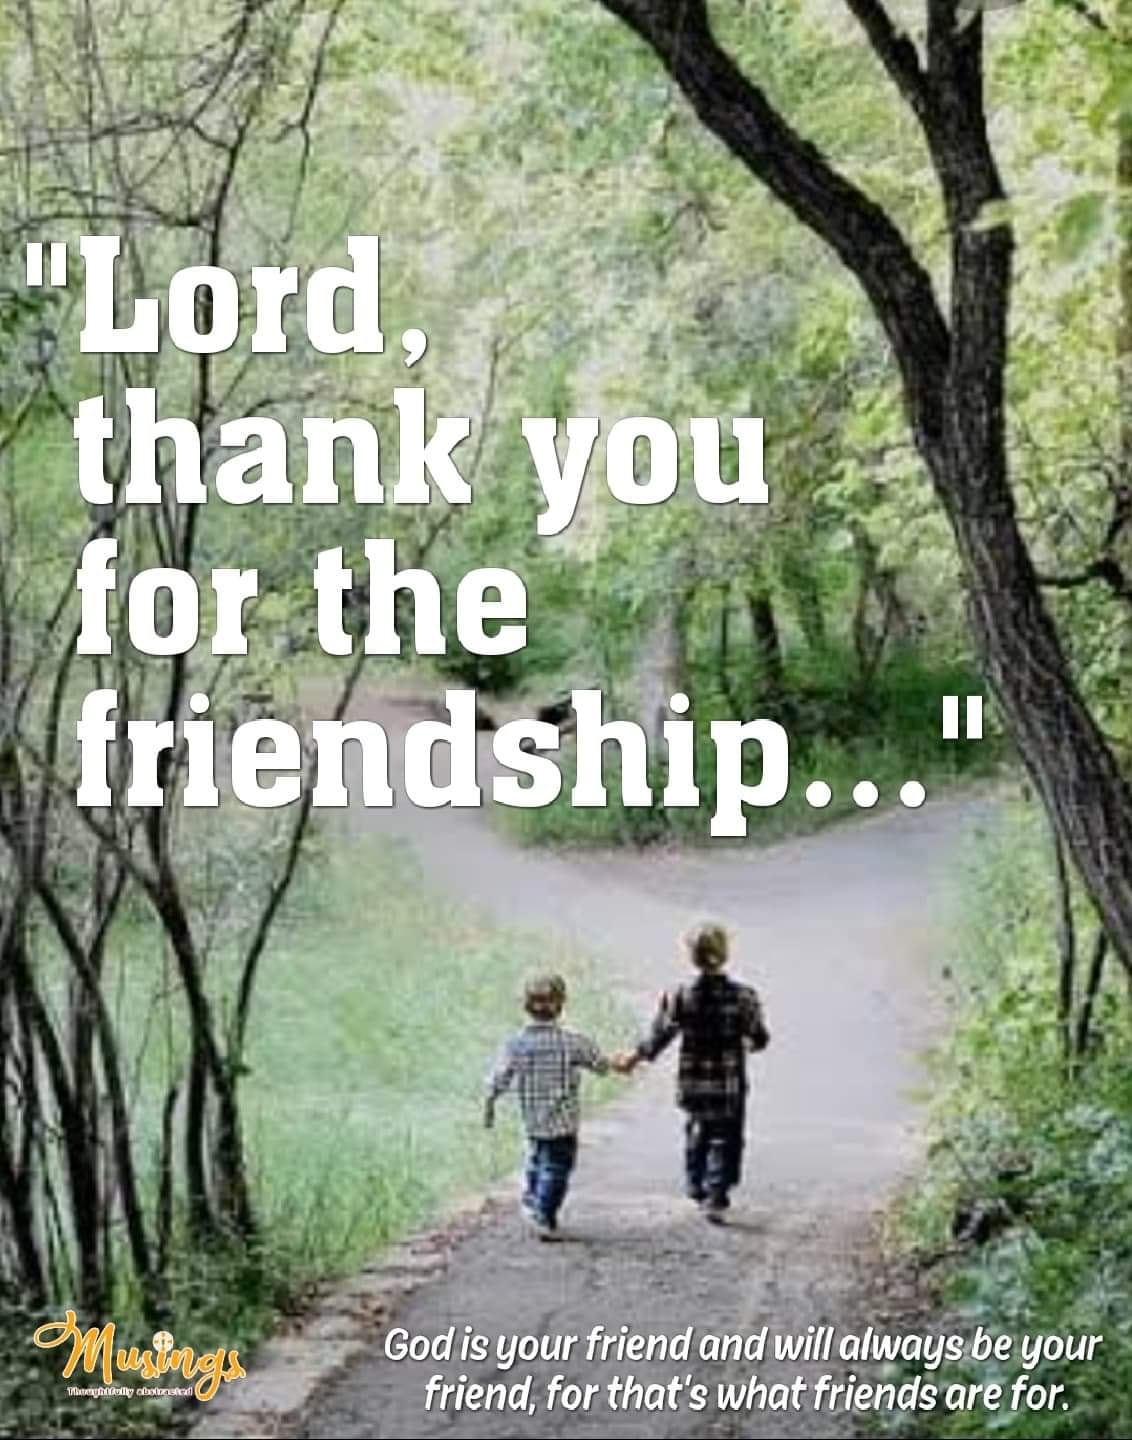 "Lord, thank you for the friendship..."